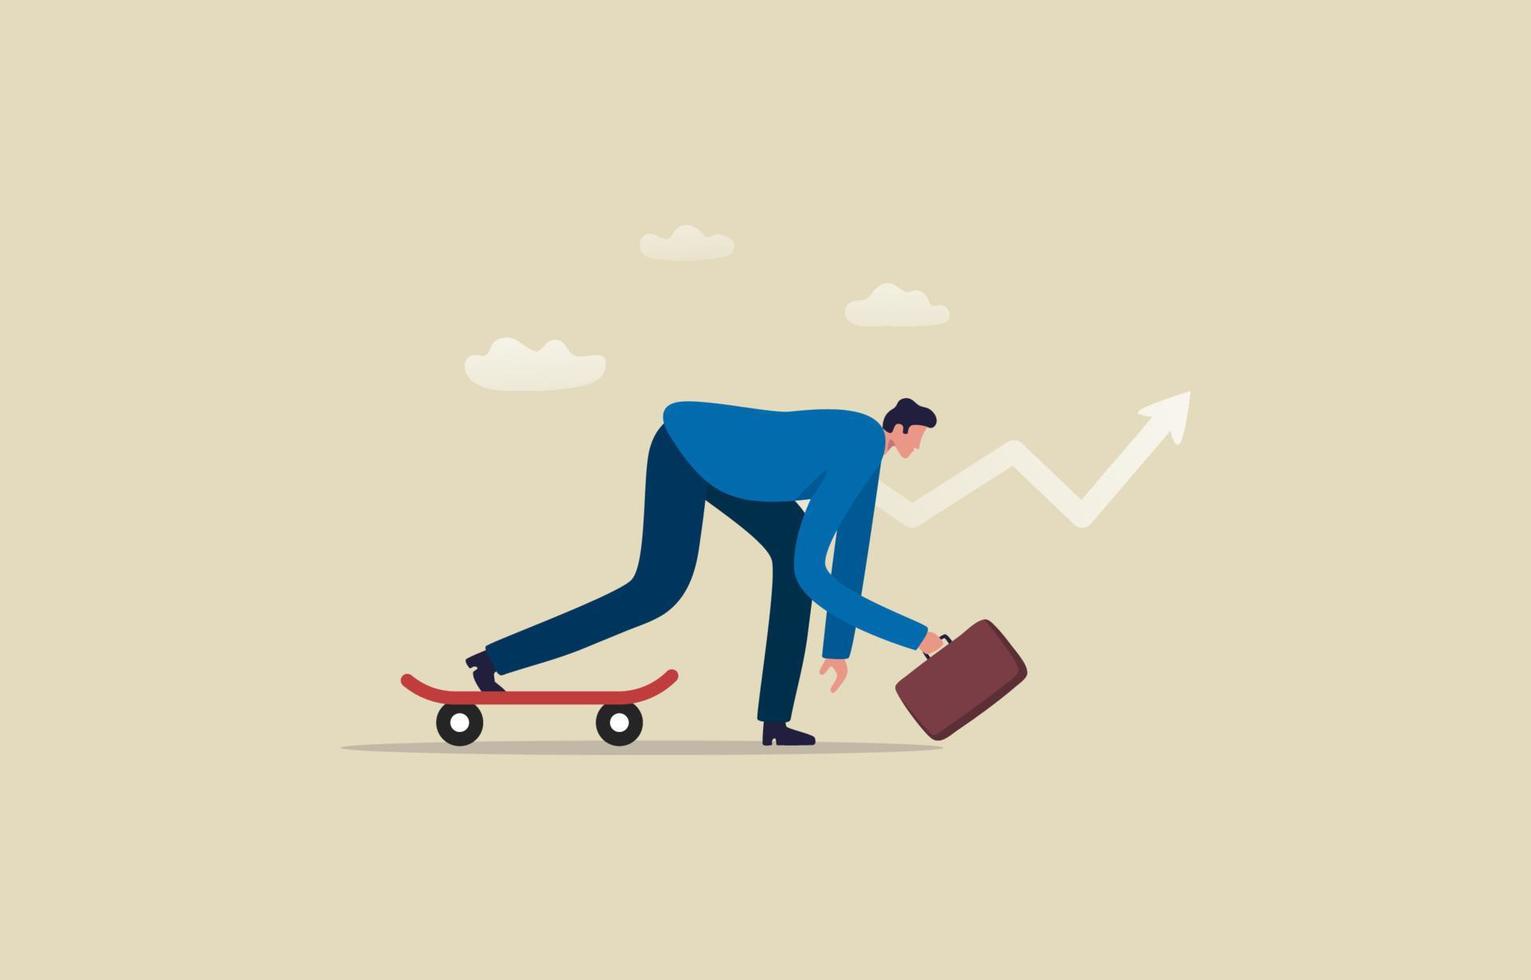 Start a new business or a new job. Start up growth in finance or career path. Determination to win. Businessman ready at starting point and skateboard. Illustration vector